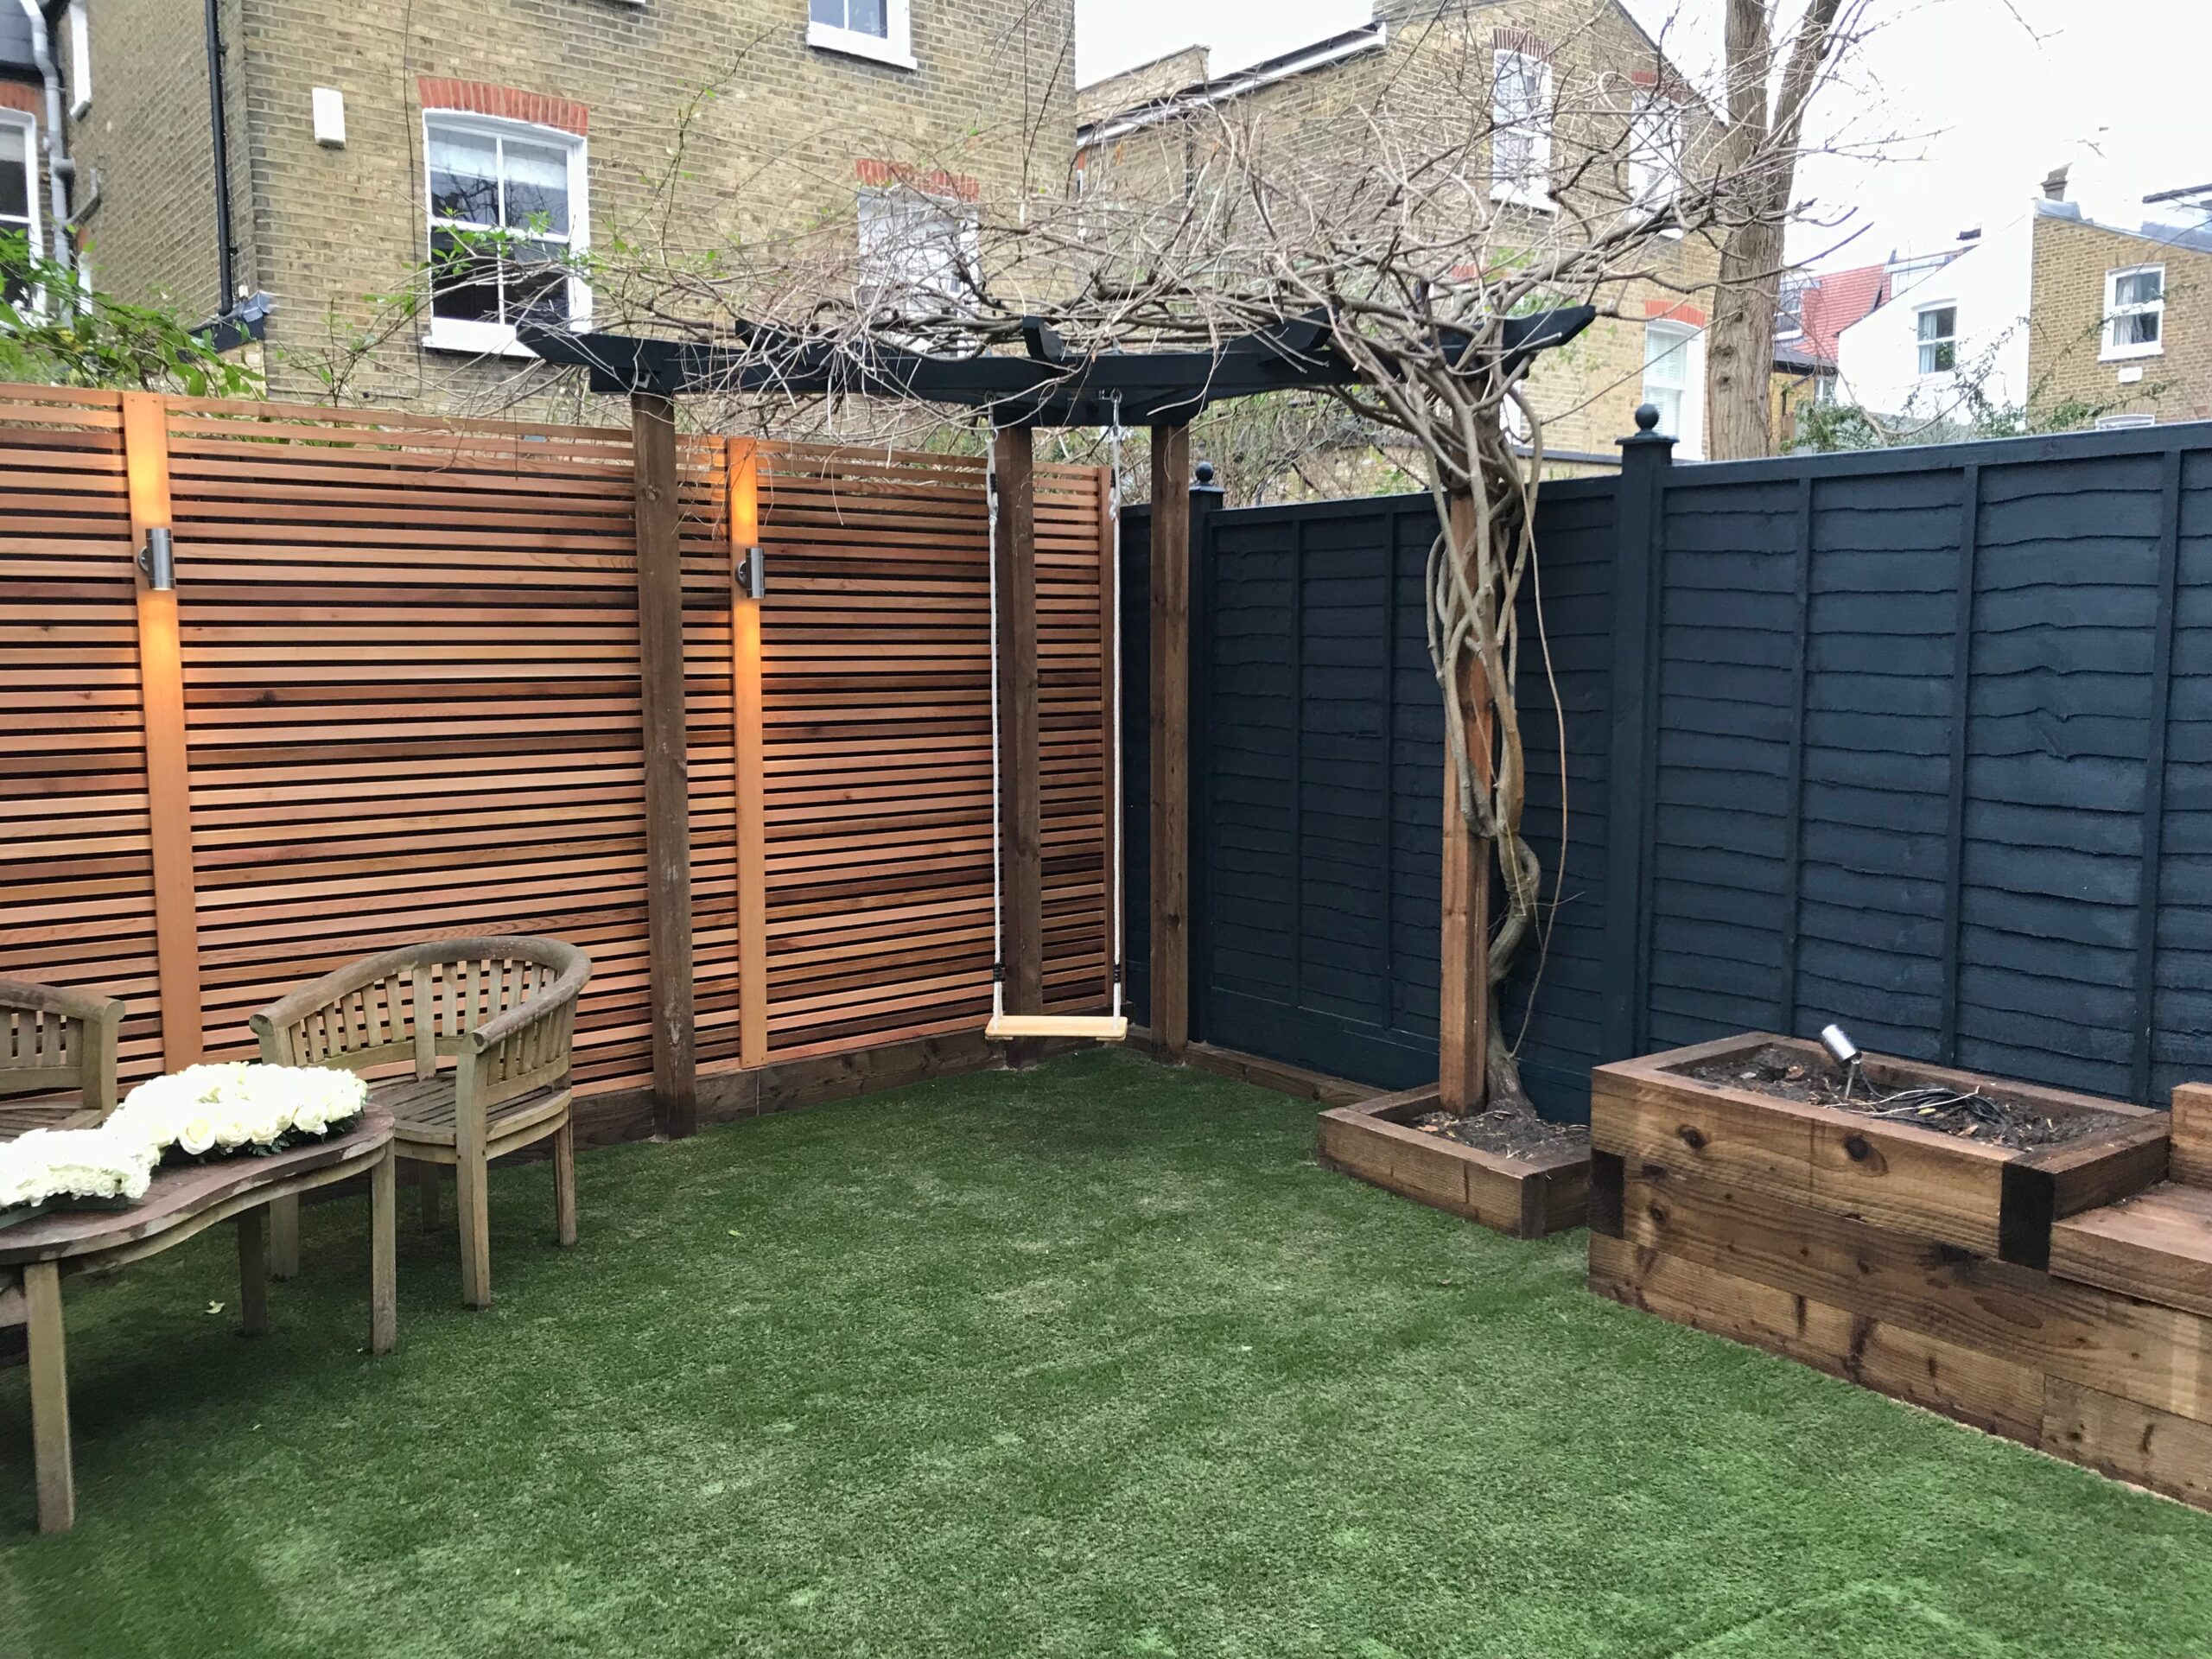 A neat garden transformation - including uplighting along fencing and a swing!